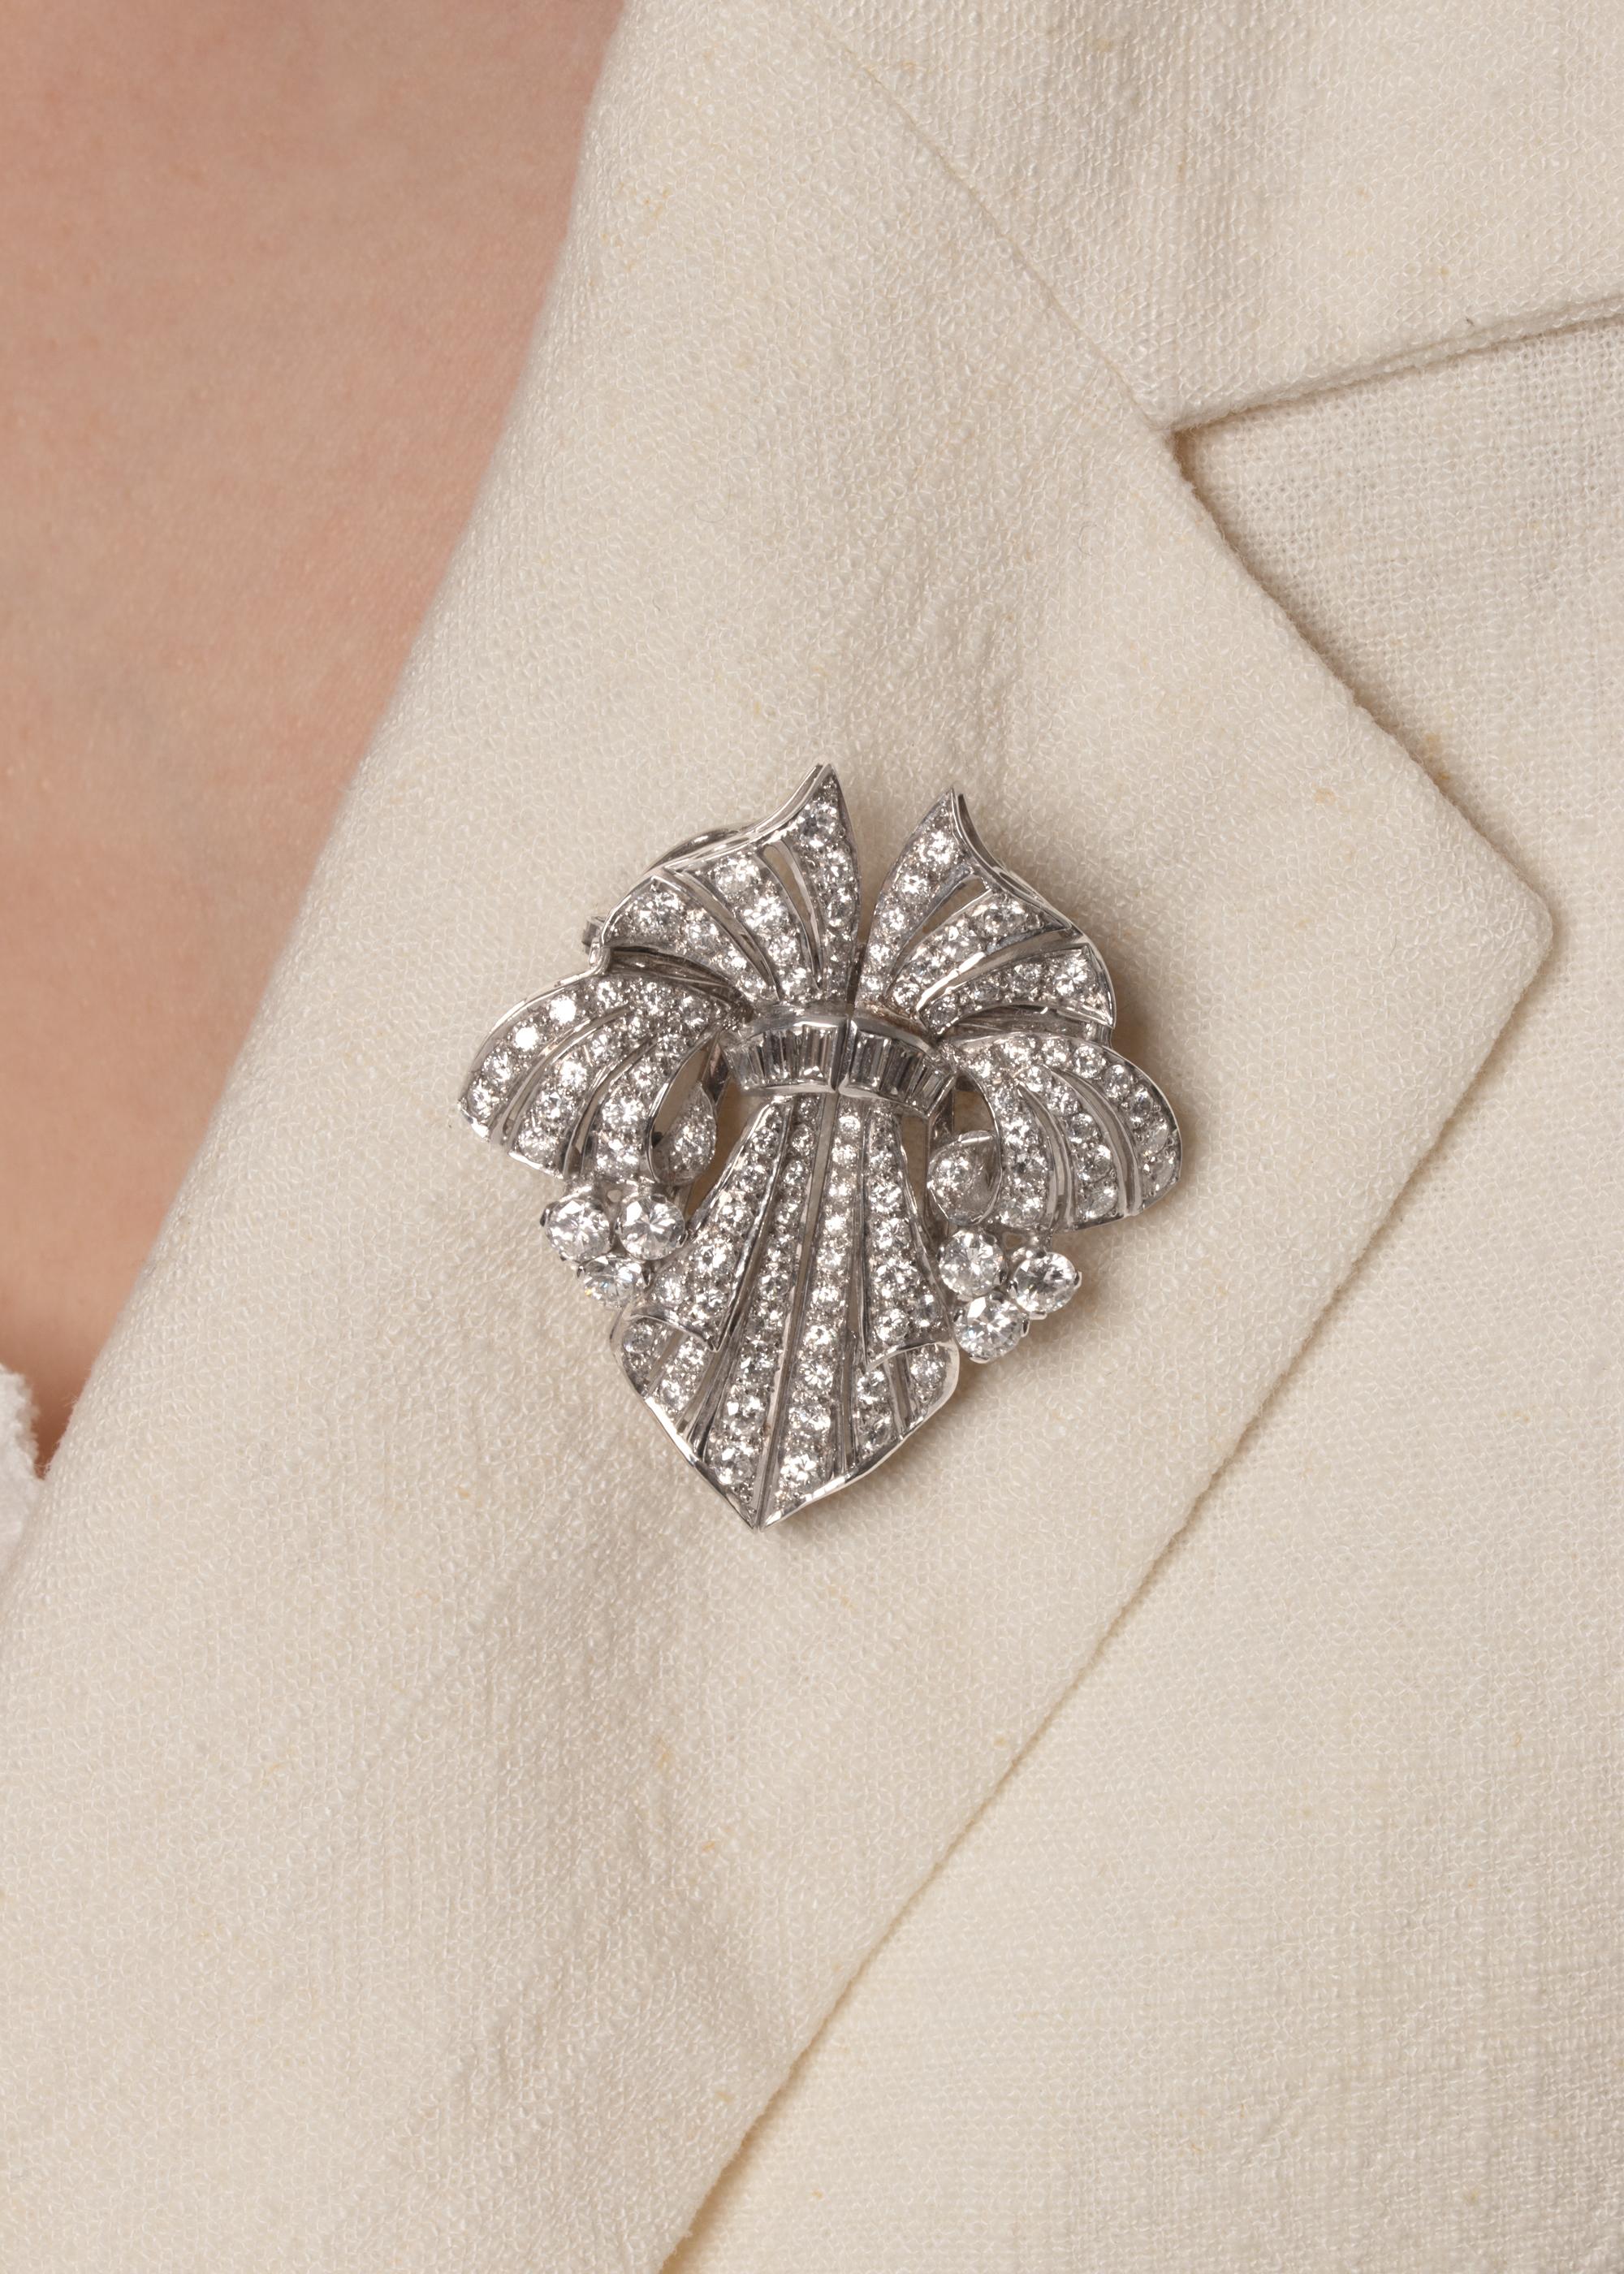 Late Deco 4.00ct Diamond Brooch, c.1940s In Good Condition For Sale In London, GB